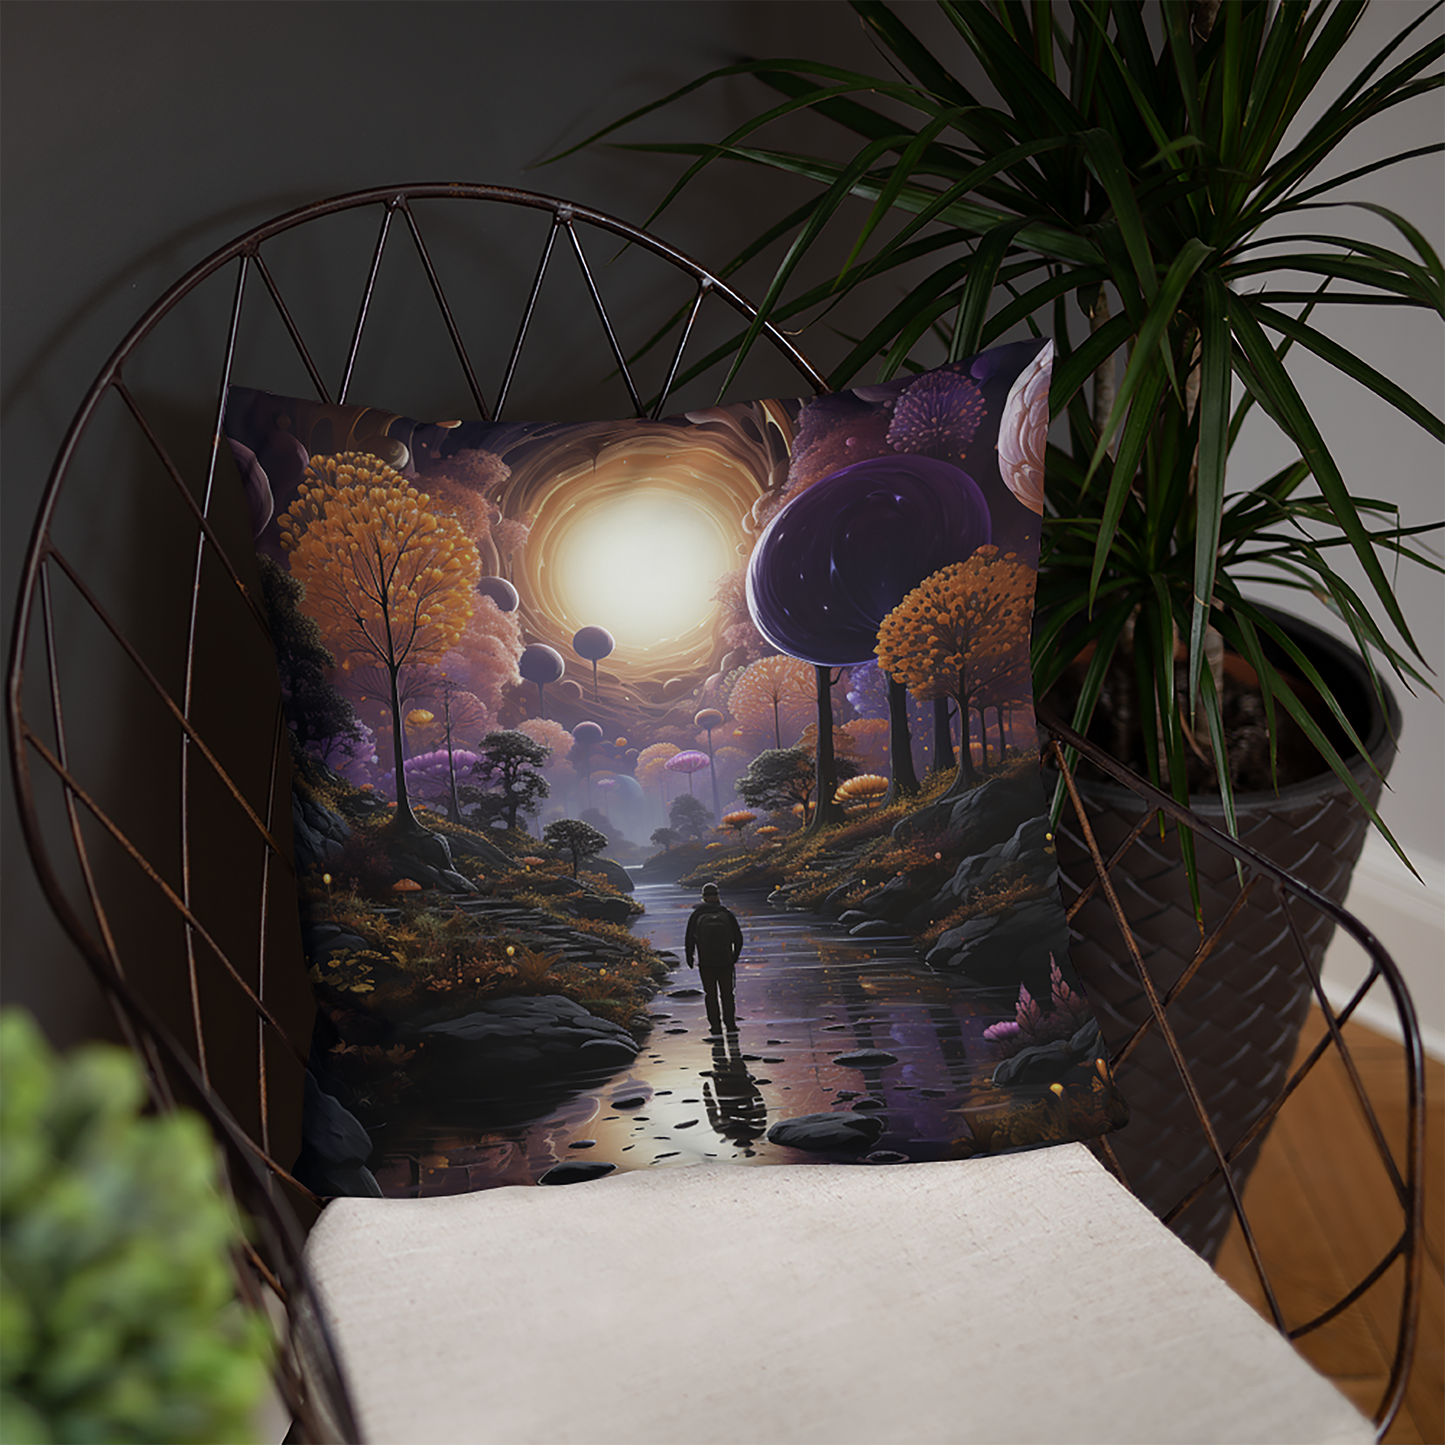 Space Throw Pillow Psychedelic Alien Forest Polyester Decorative Cushion 18x18